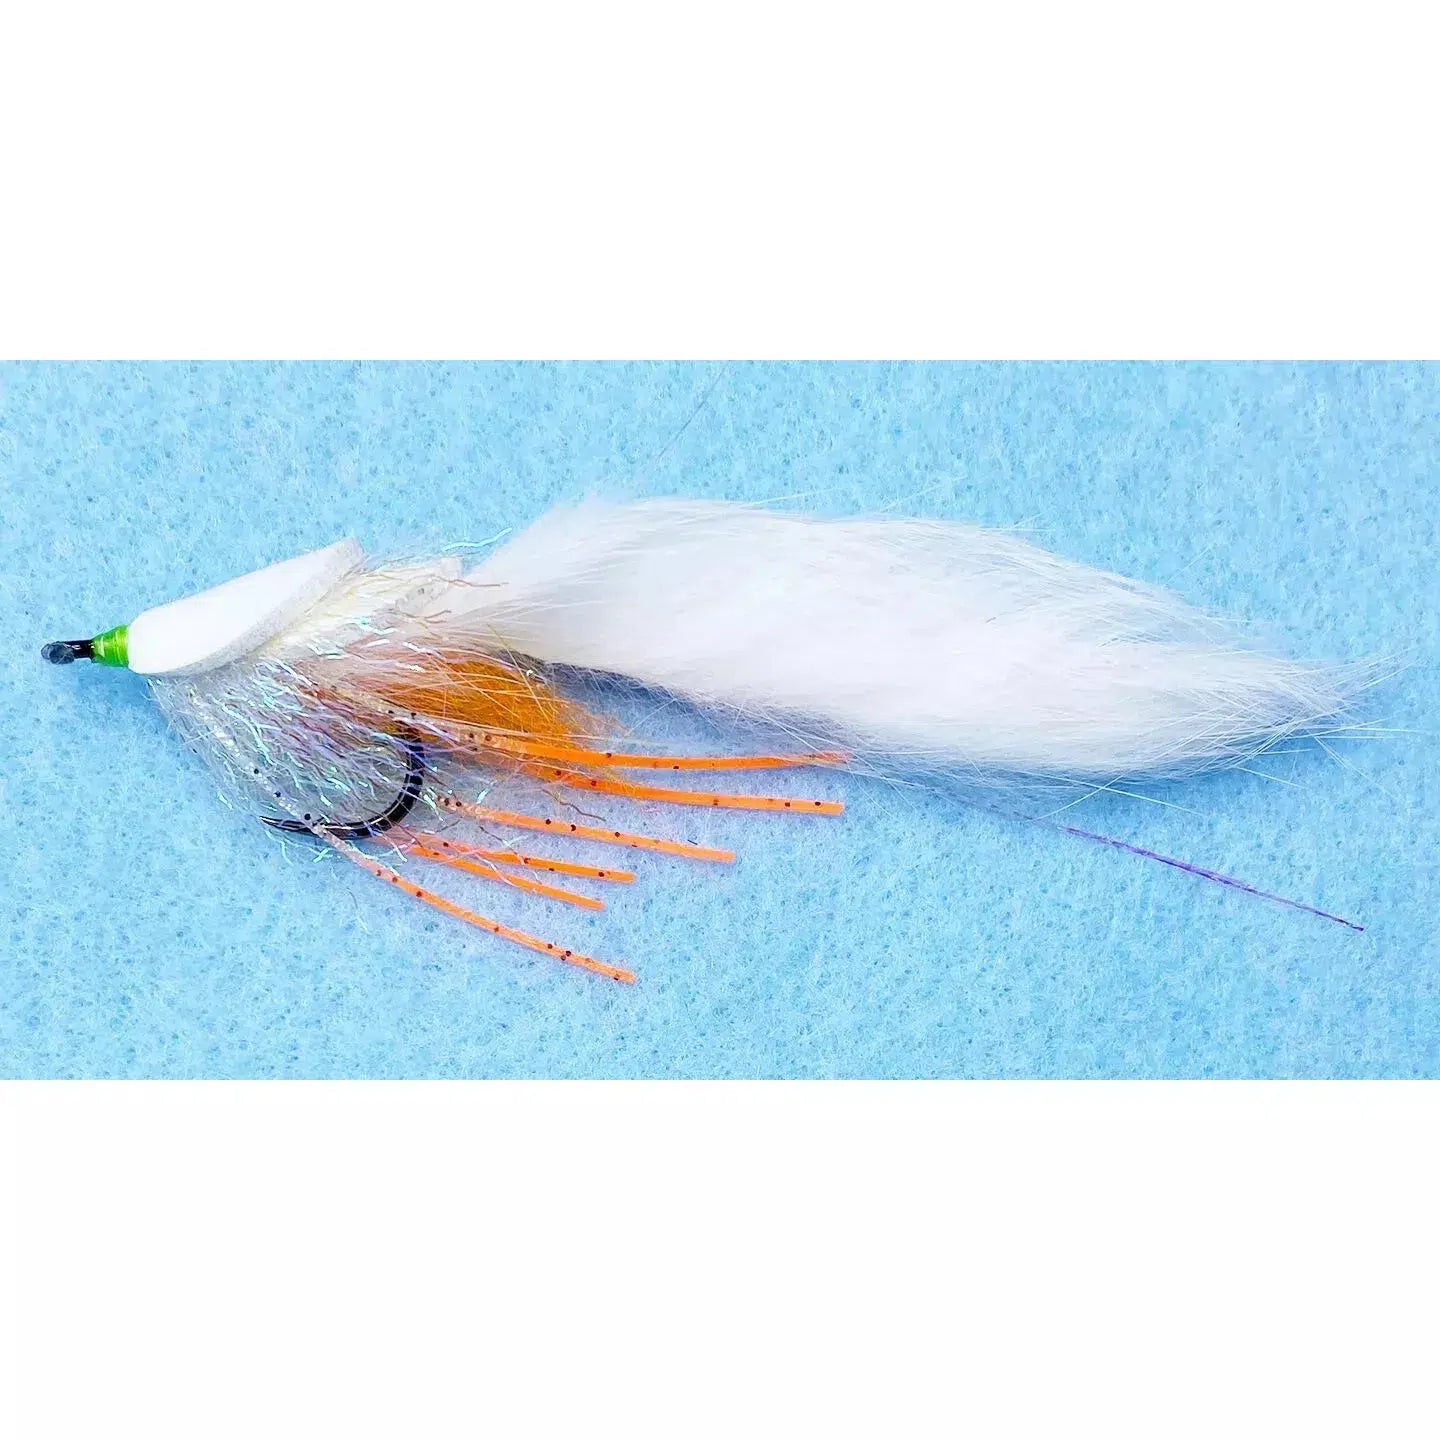 Enrico Puglisi Diver Fly-Lure - Saltwater Fly-Enrico Puglisi-Crystal White-Size 2/0-Fishing Station